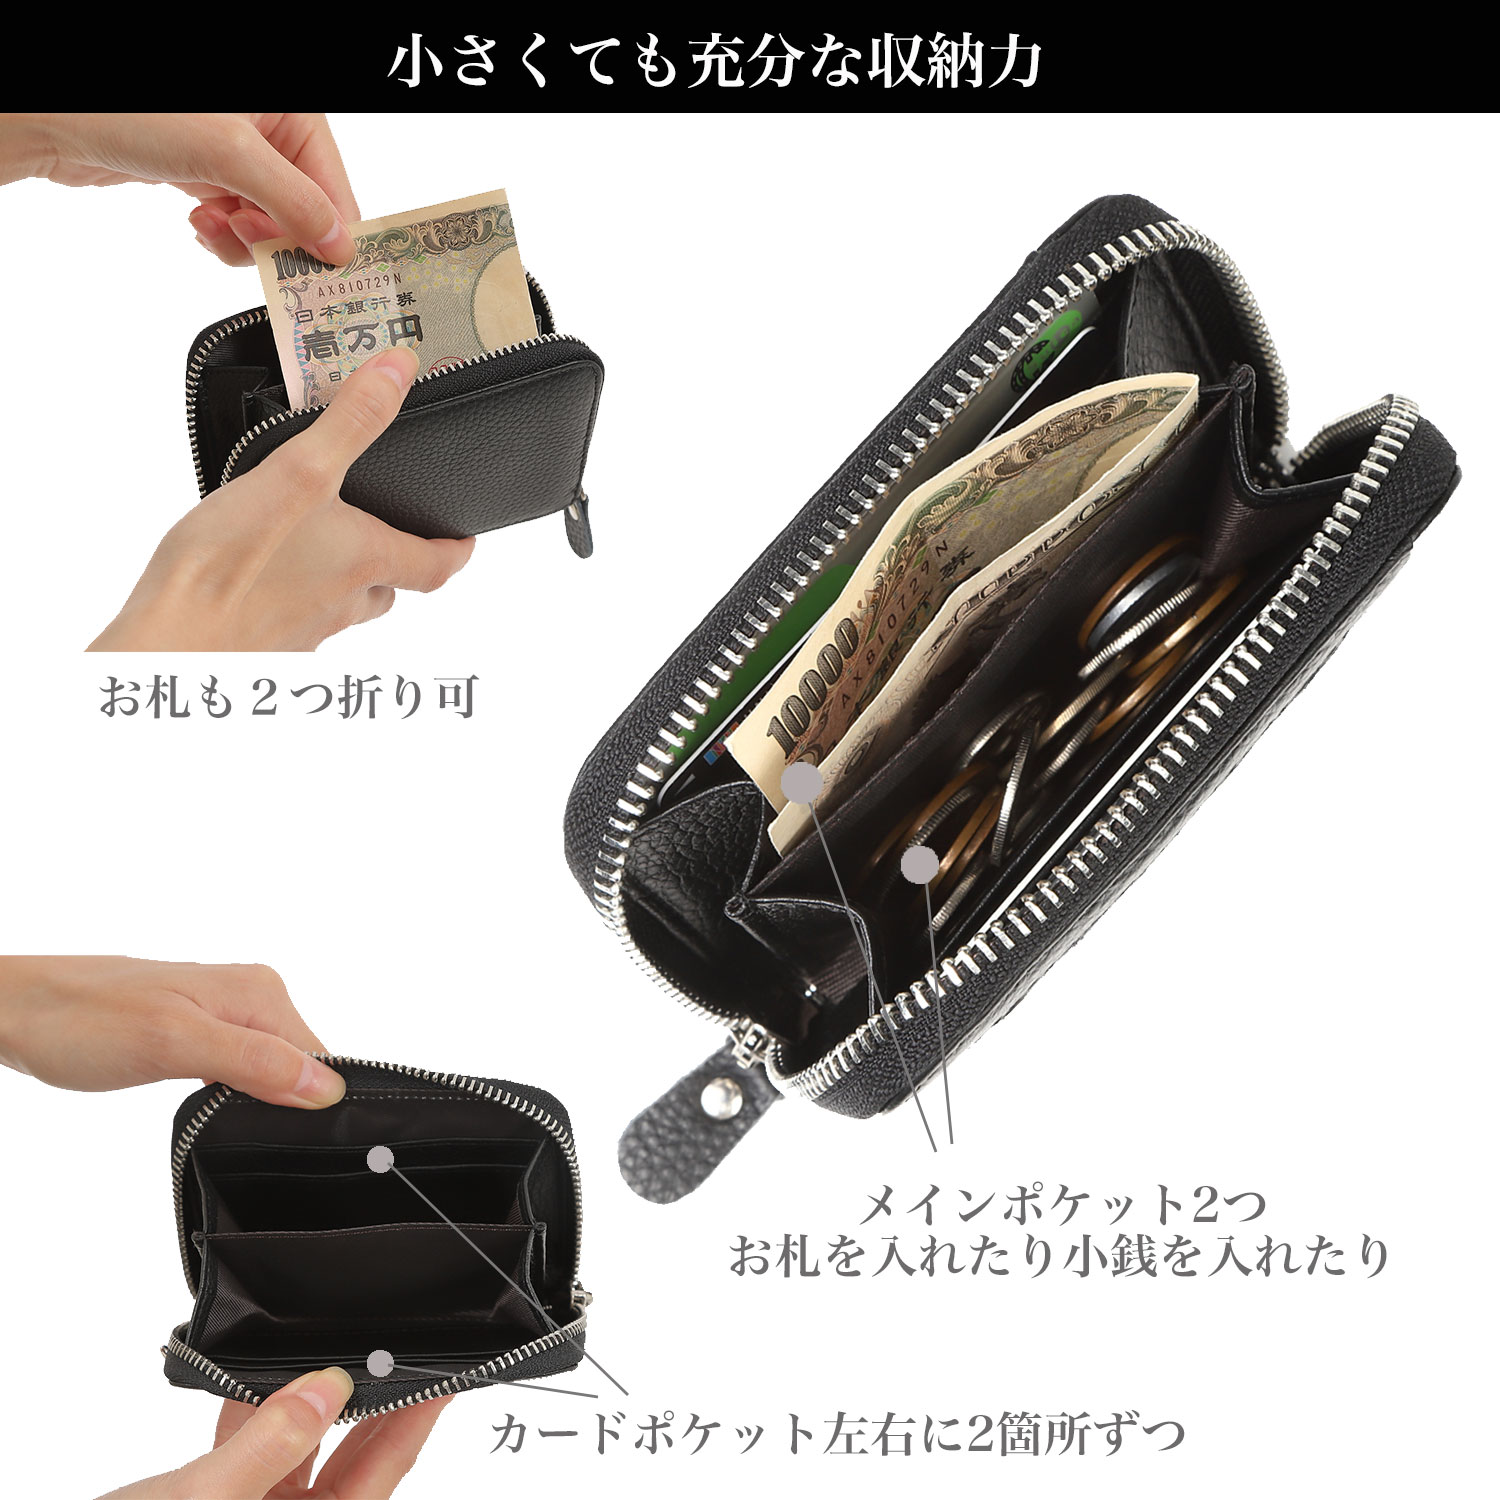  pass case change purse . men's lady's reel attaching purse coin case leather original leather both sides IC inserting ticket holder 